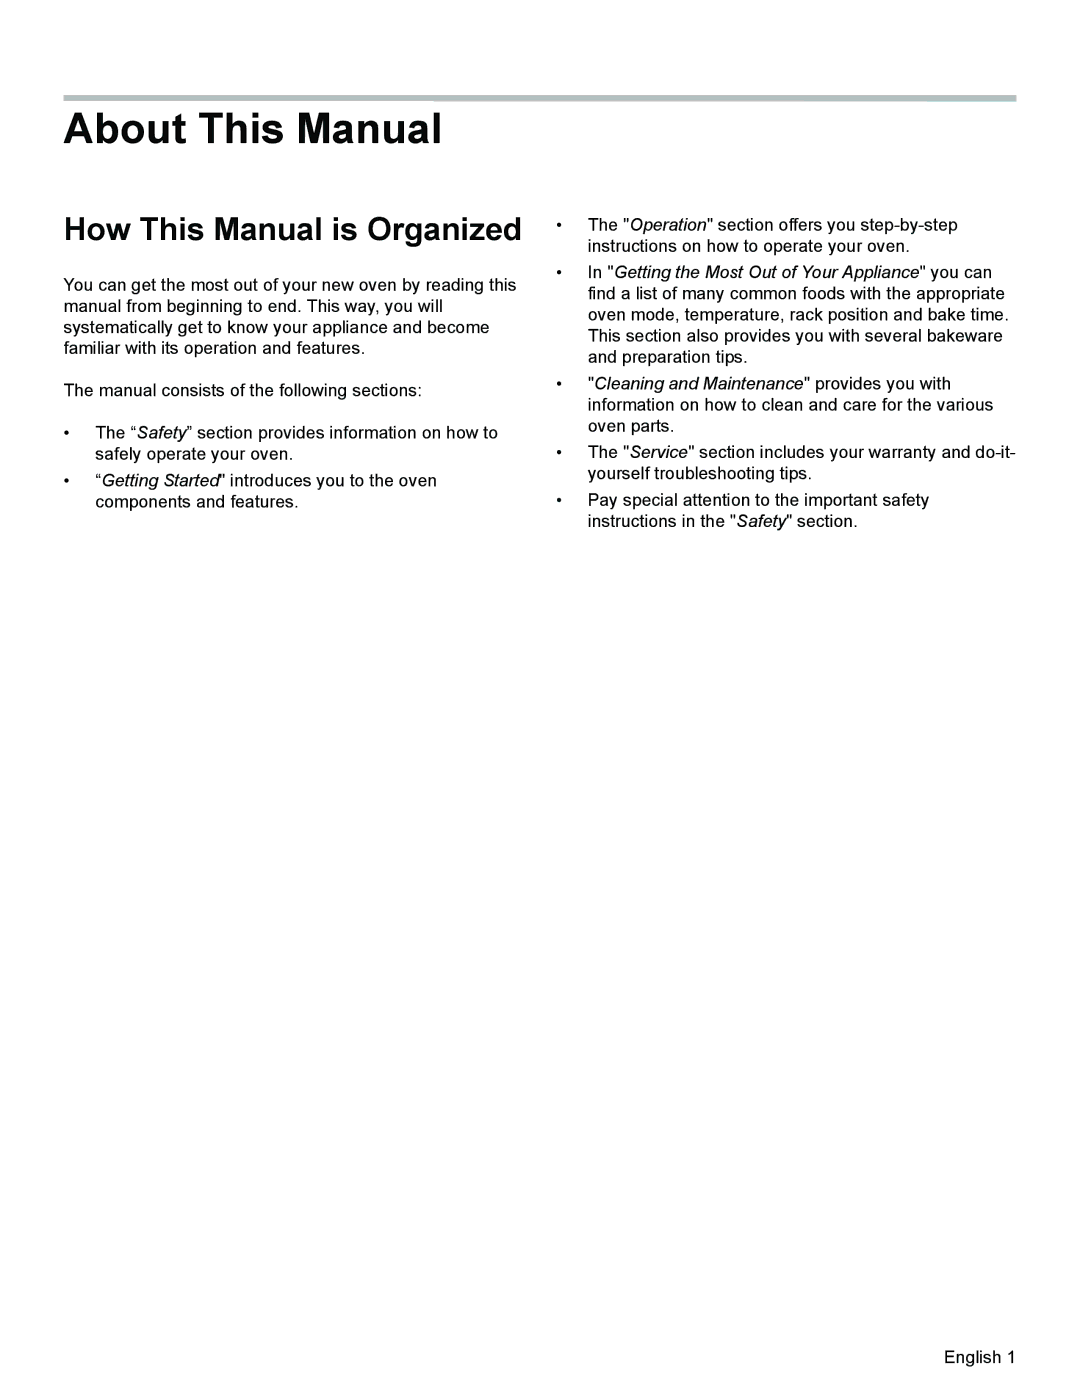 Bosch Appliances HES3023U manual About This Manual, How This Manual is Organized 